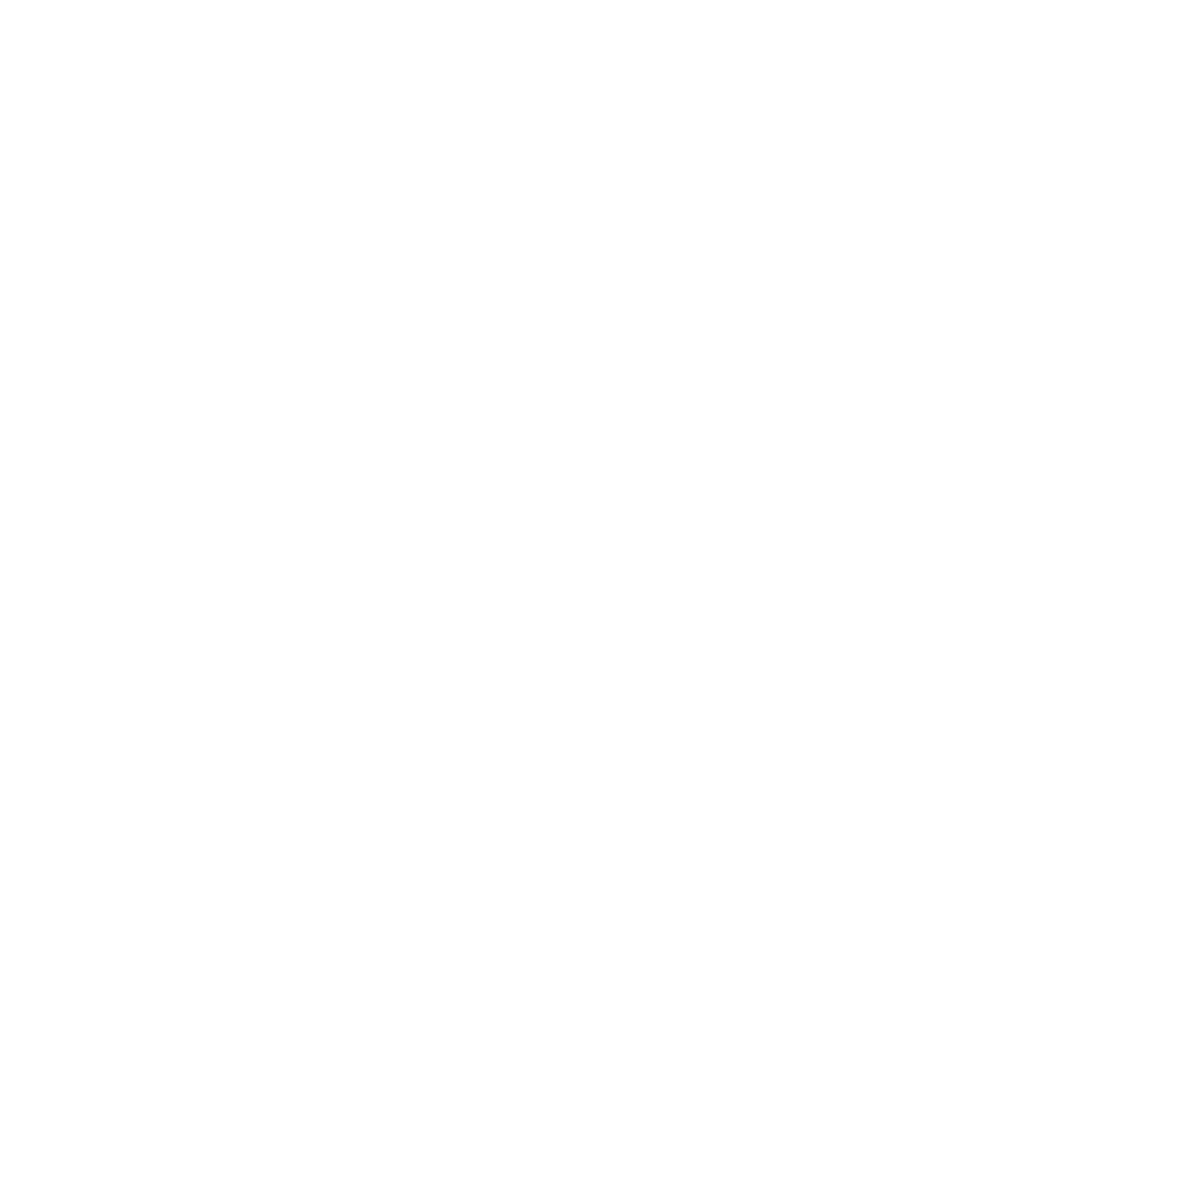 Real-time regrogrammable